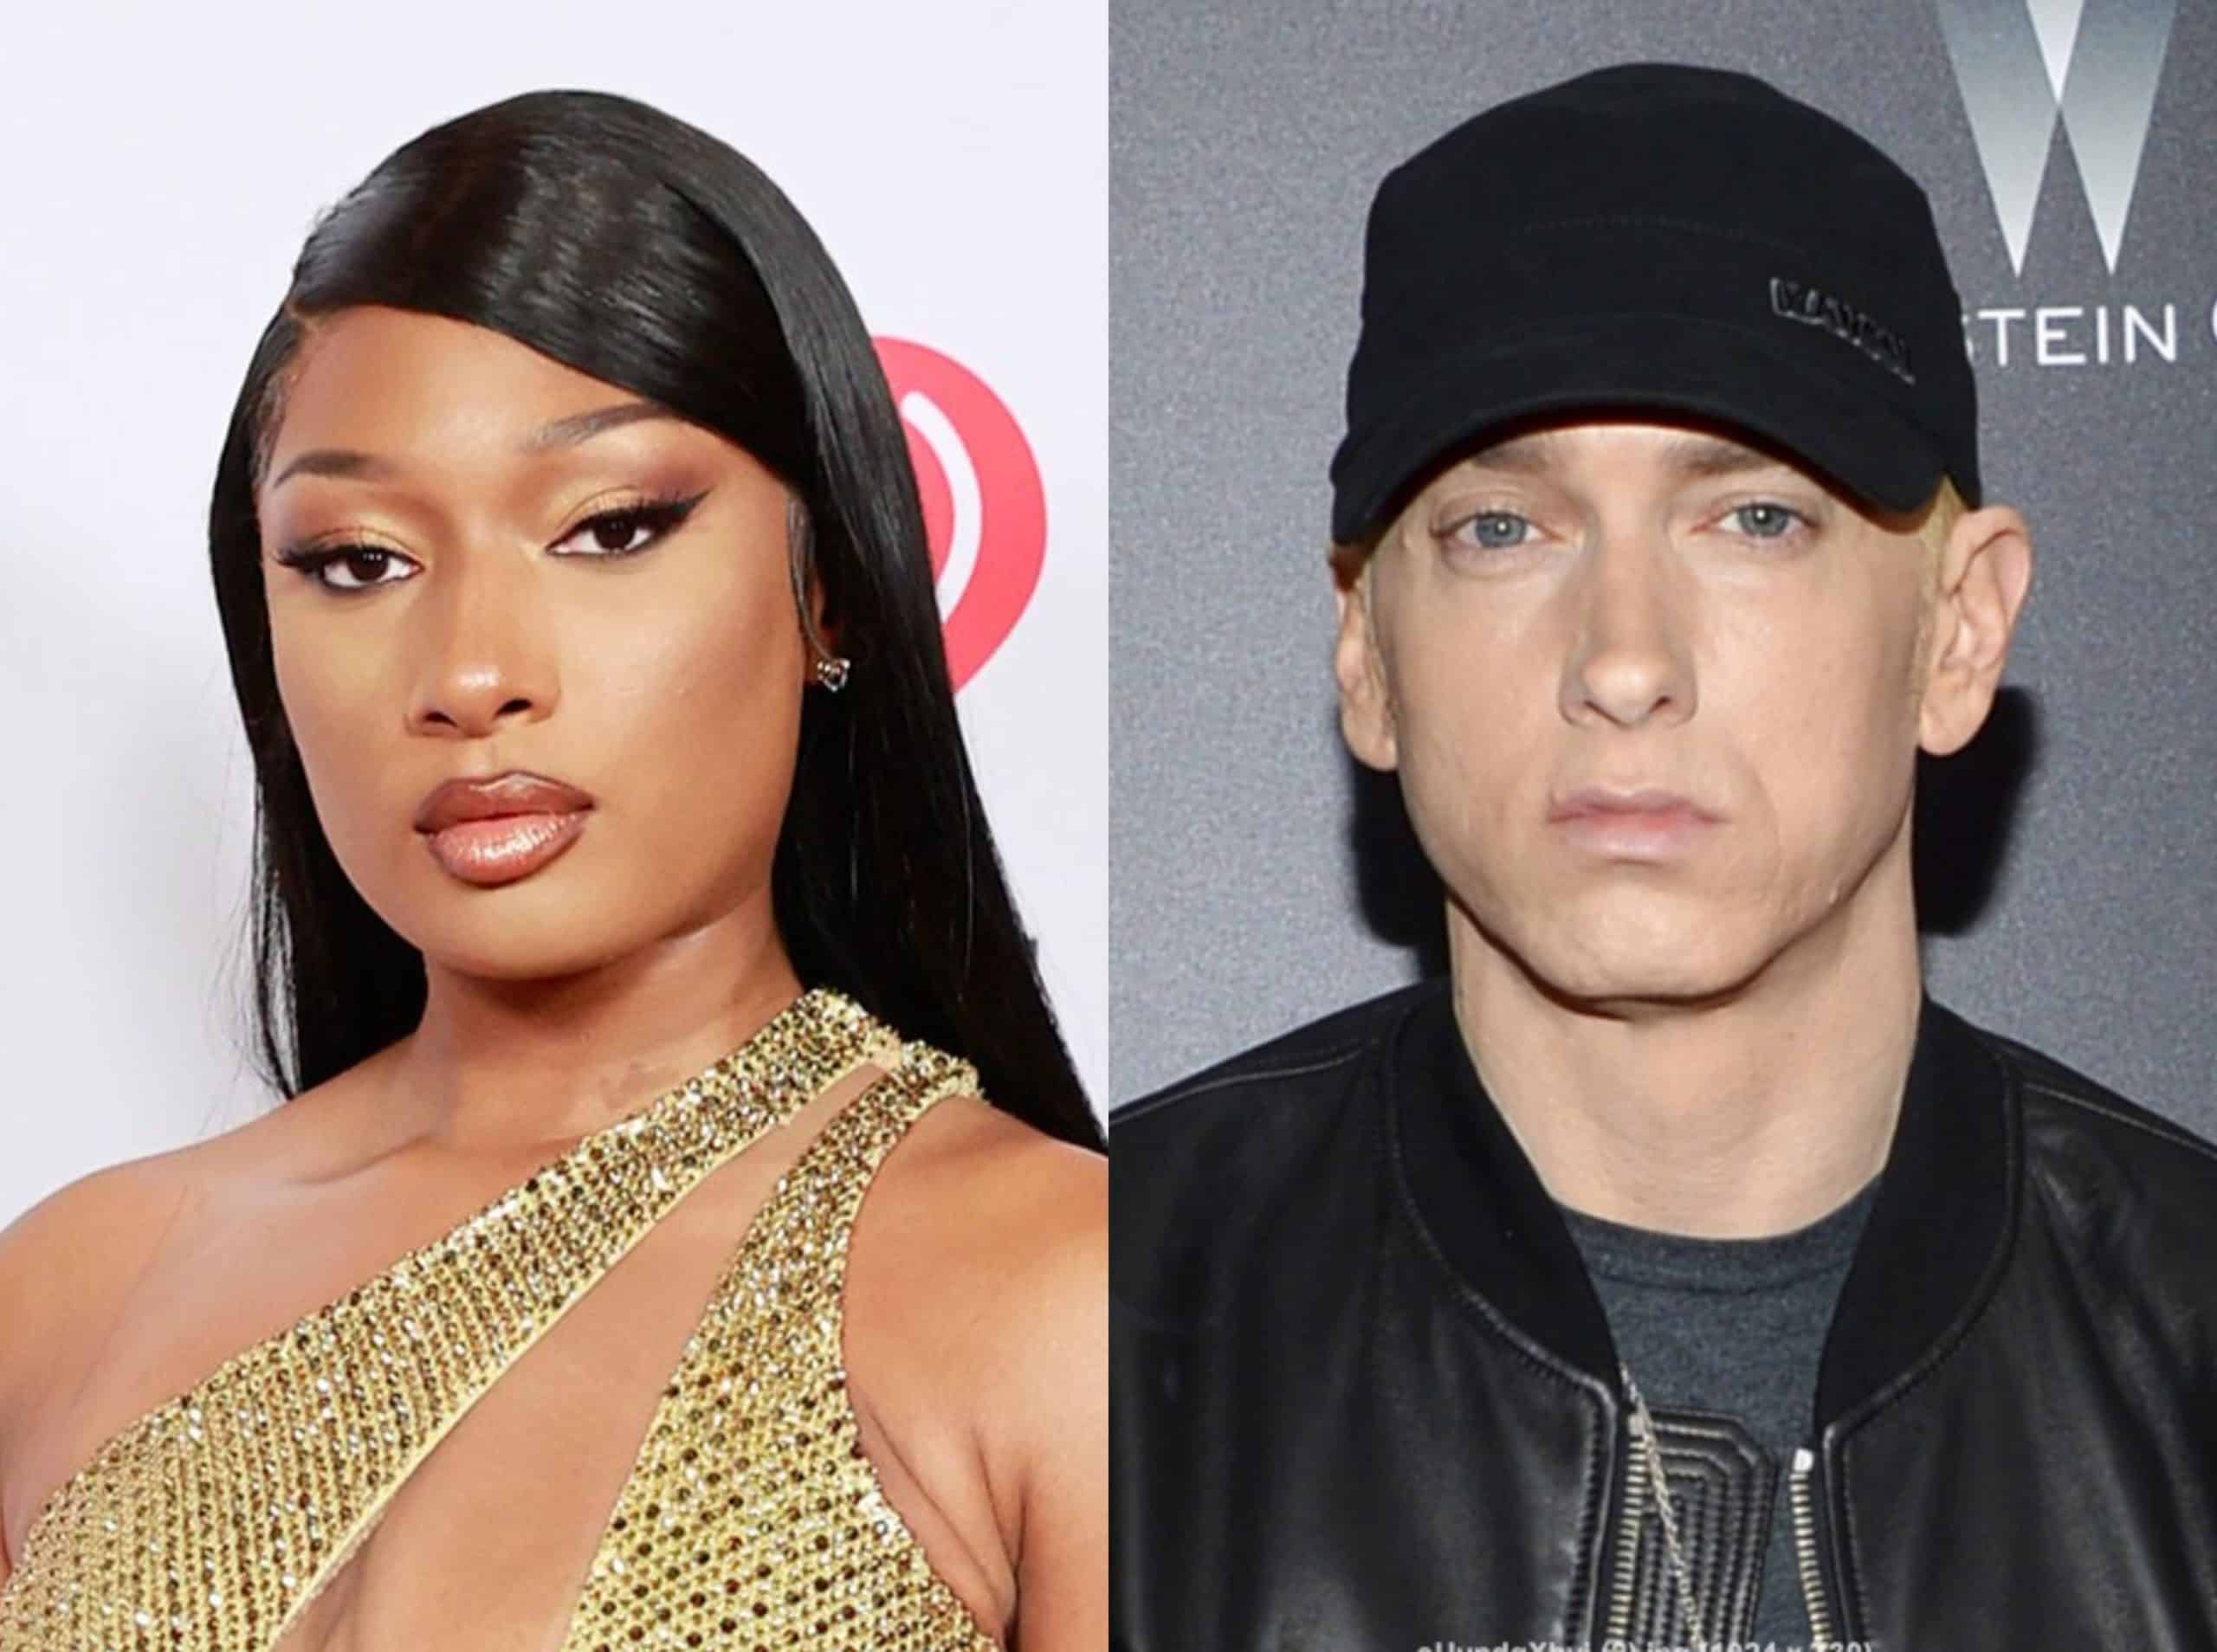 Megan Thee Stallion References Eminem on New Collab with Lil Nas X